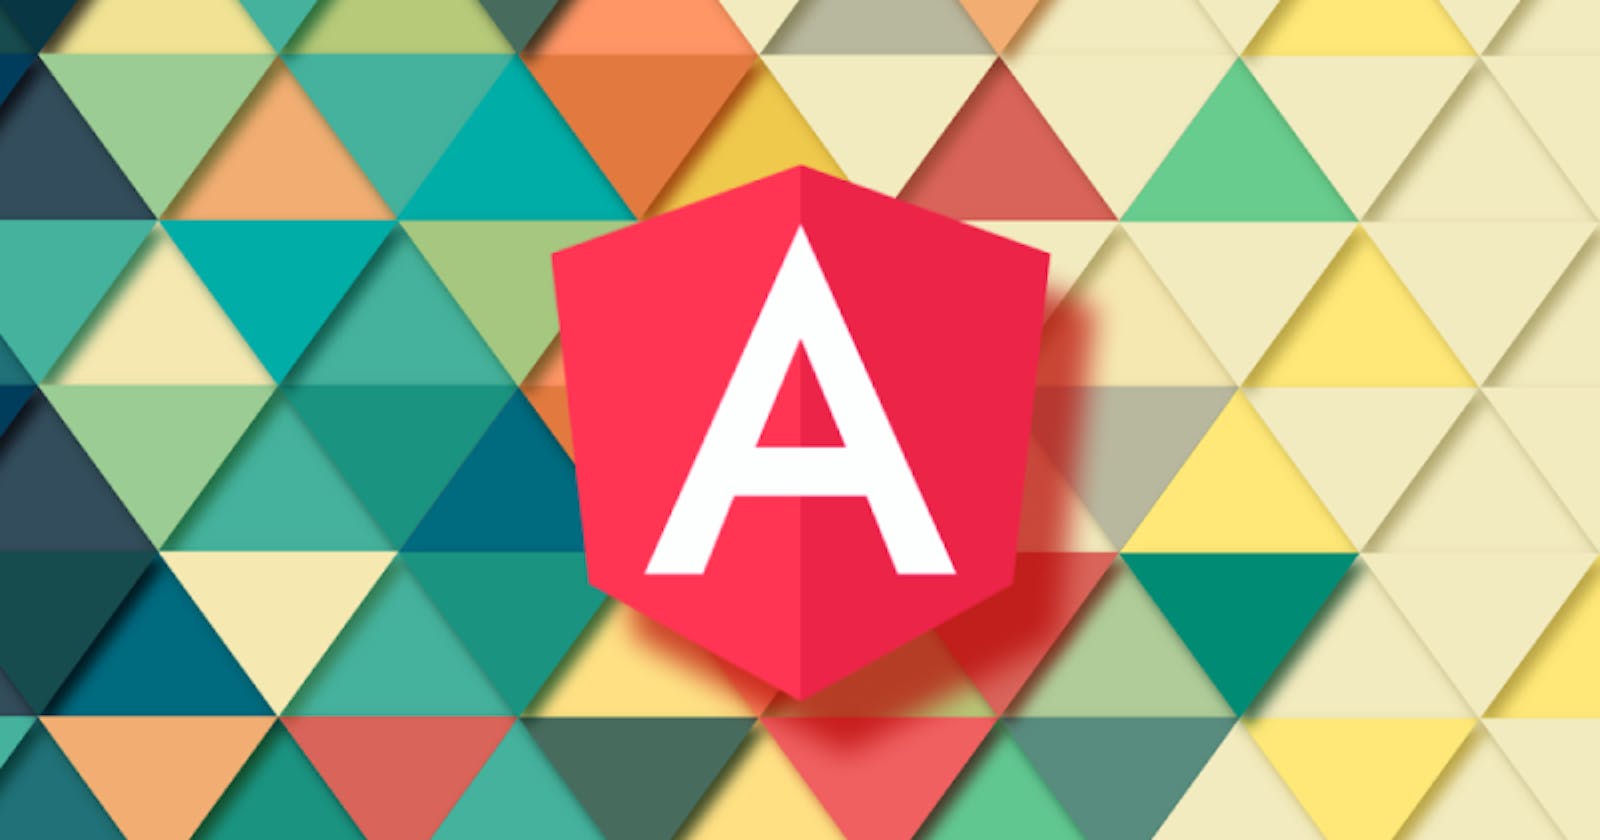 Custom Theme for Angular Material Components Series: Part 1 — Create a Theme